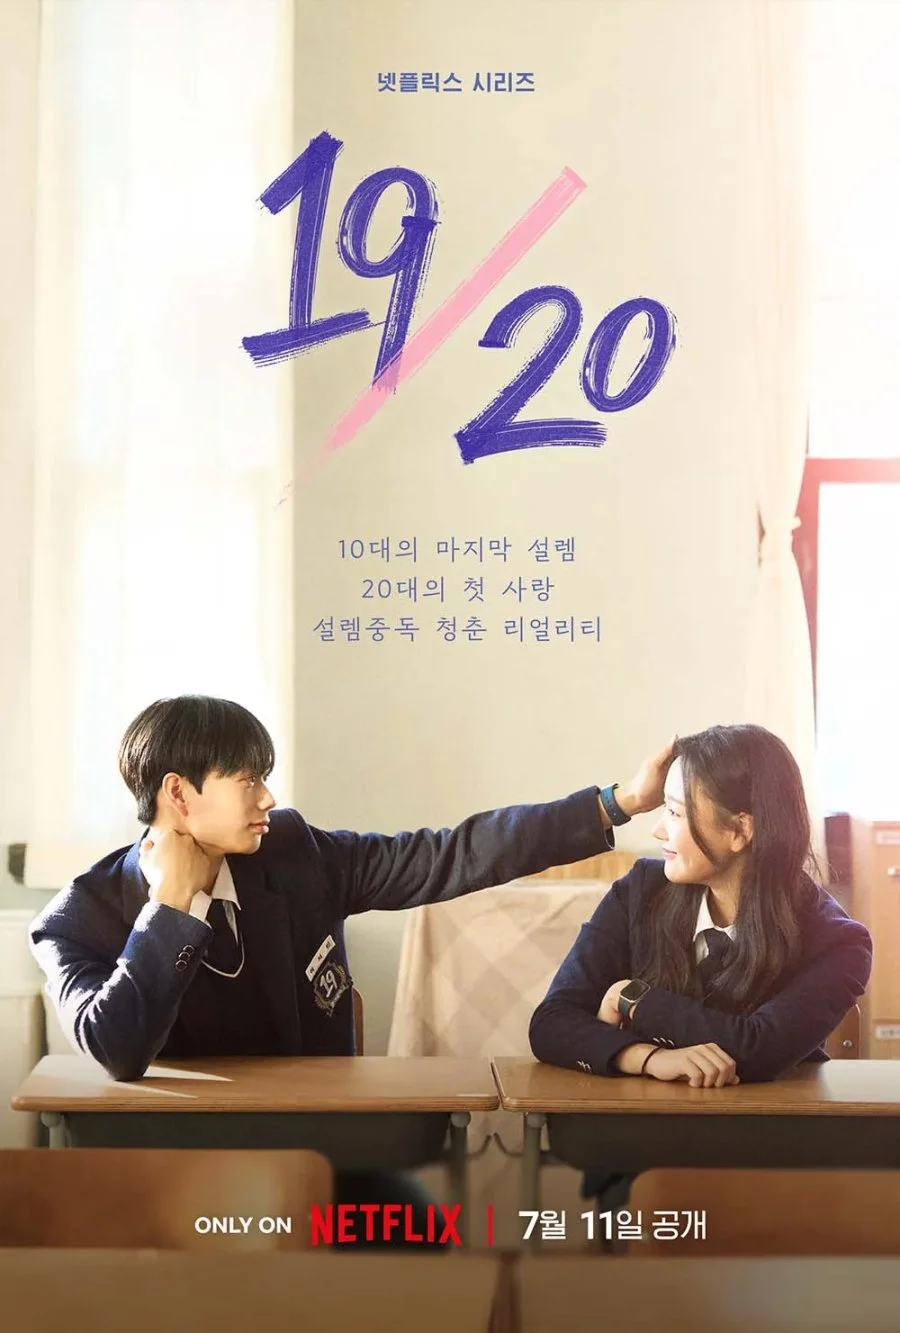 Read More About The Article Nineteen To Twenty S01 (Episode 11 – 13 Added) | Variety Show